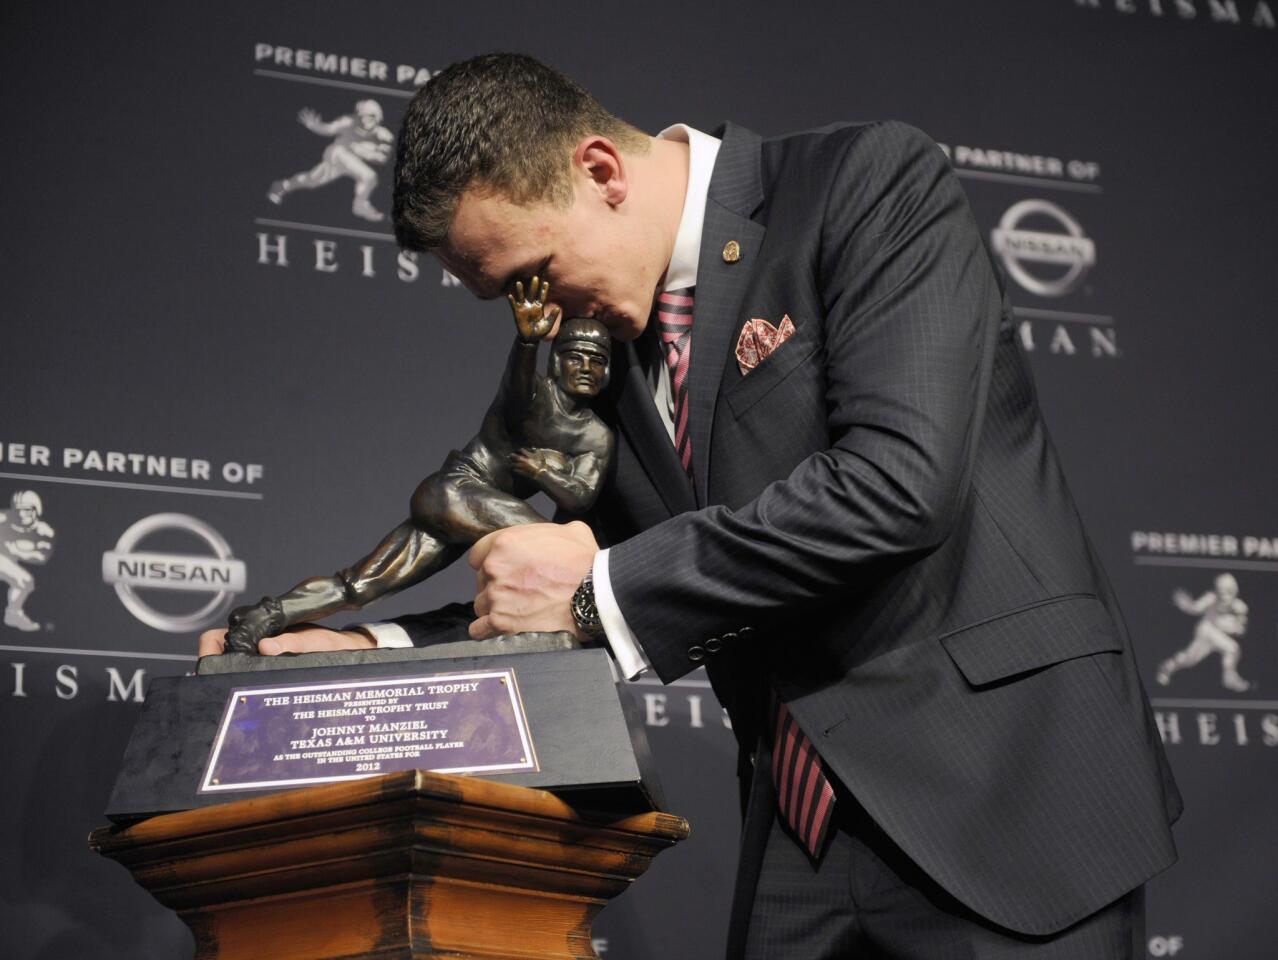 Texas A&M quarterback Johnny Manziel gives the Heisman Trolphy a kiss after becoming the first freshman to win the award on Saturday night at the Best Buy Theater in New York.